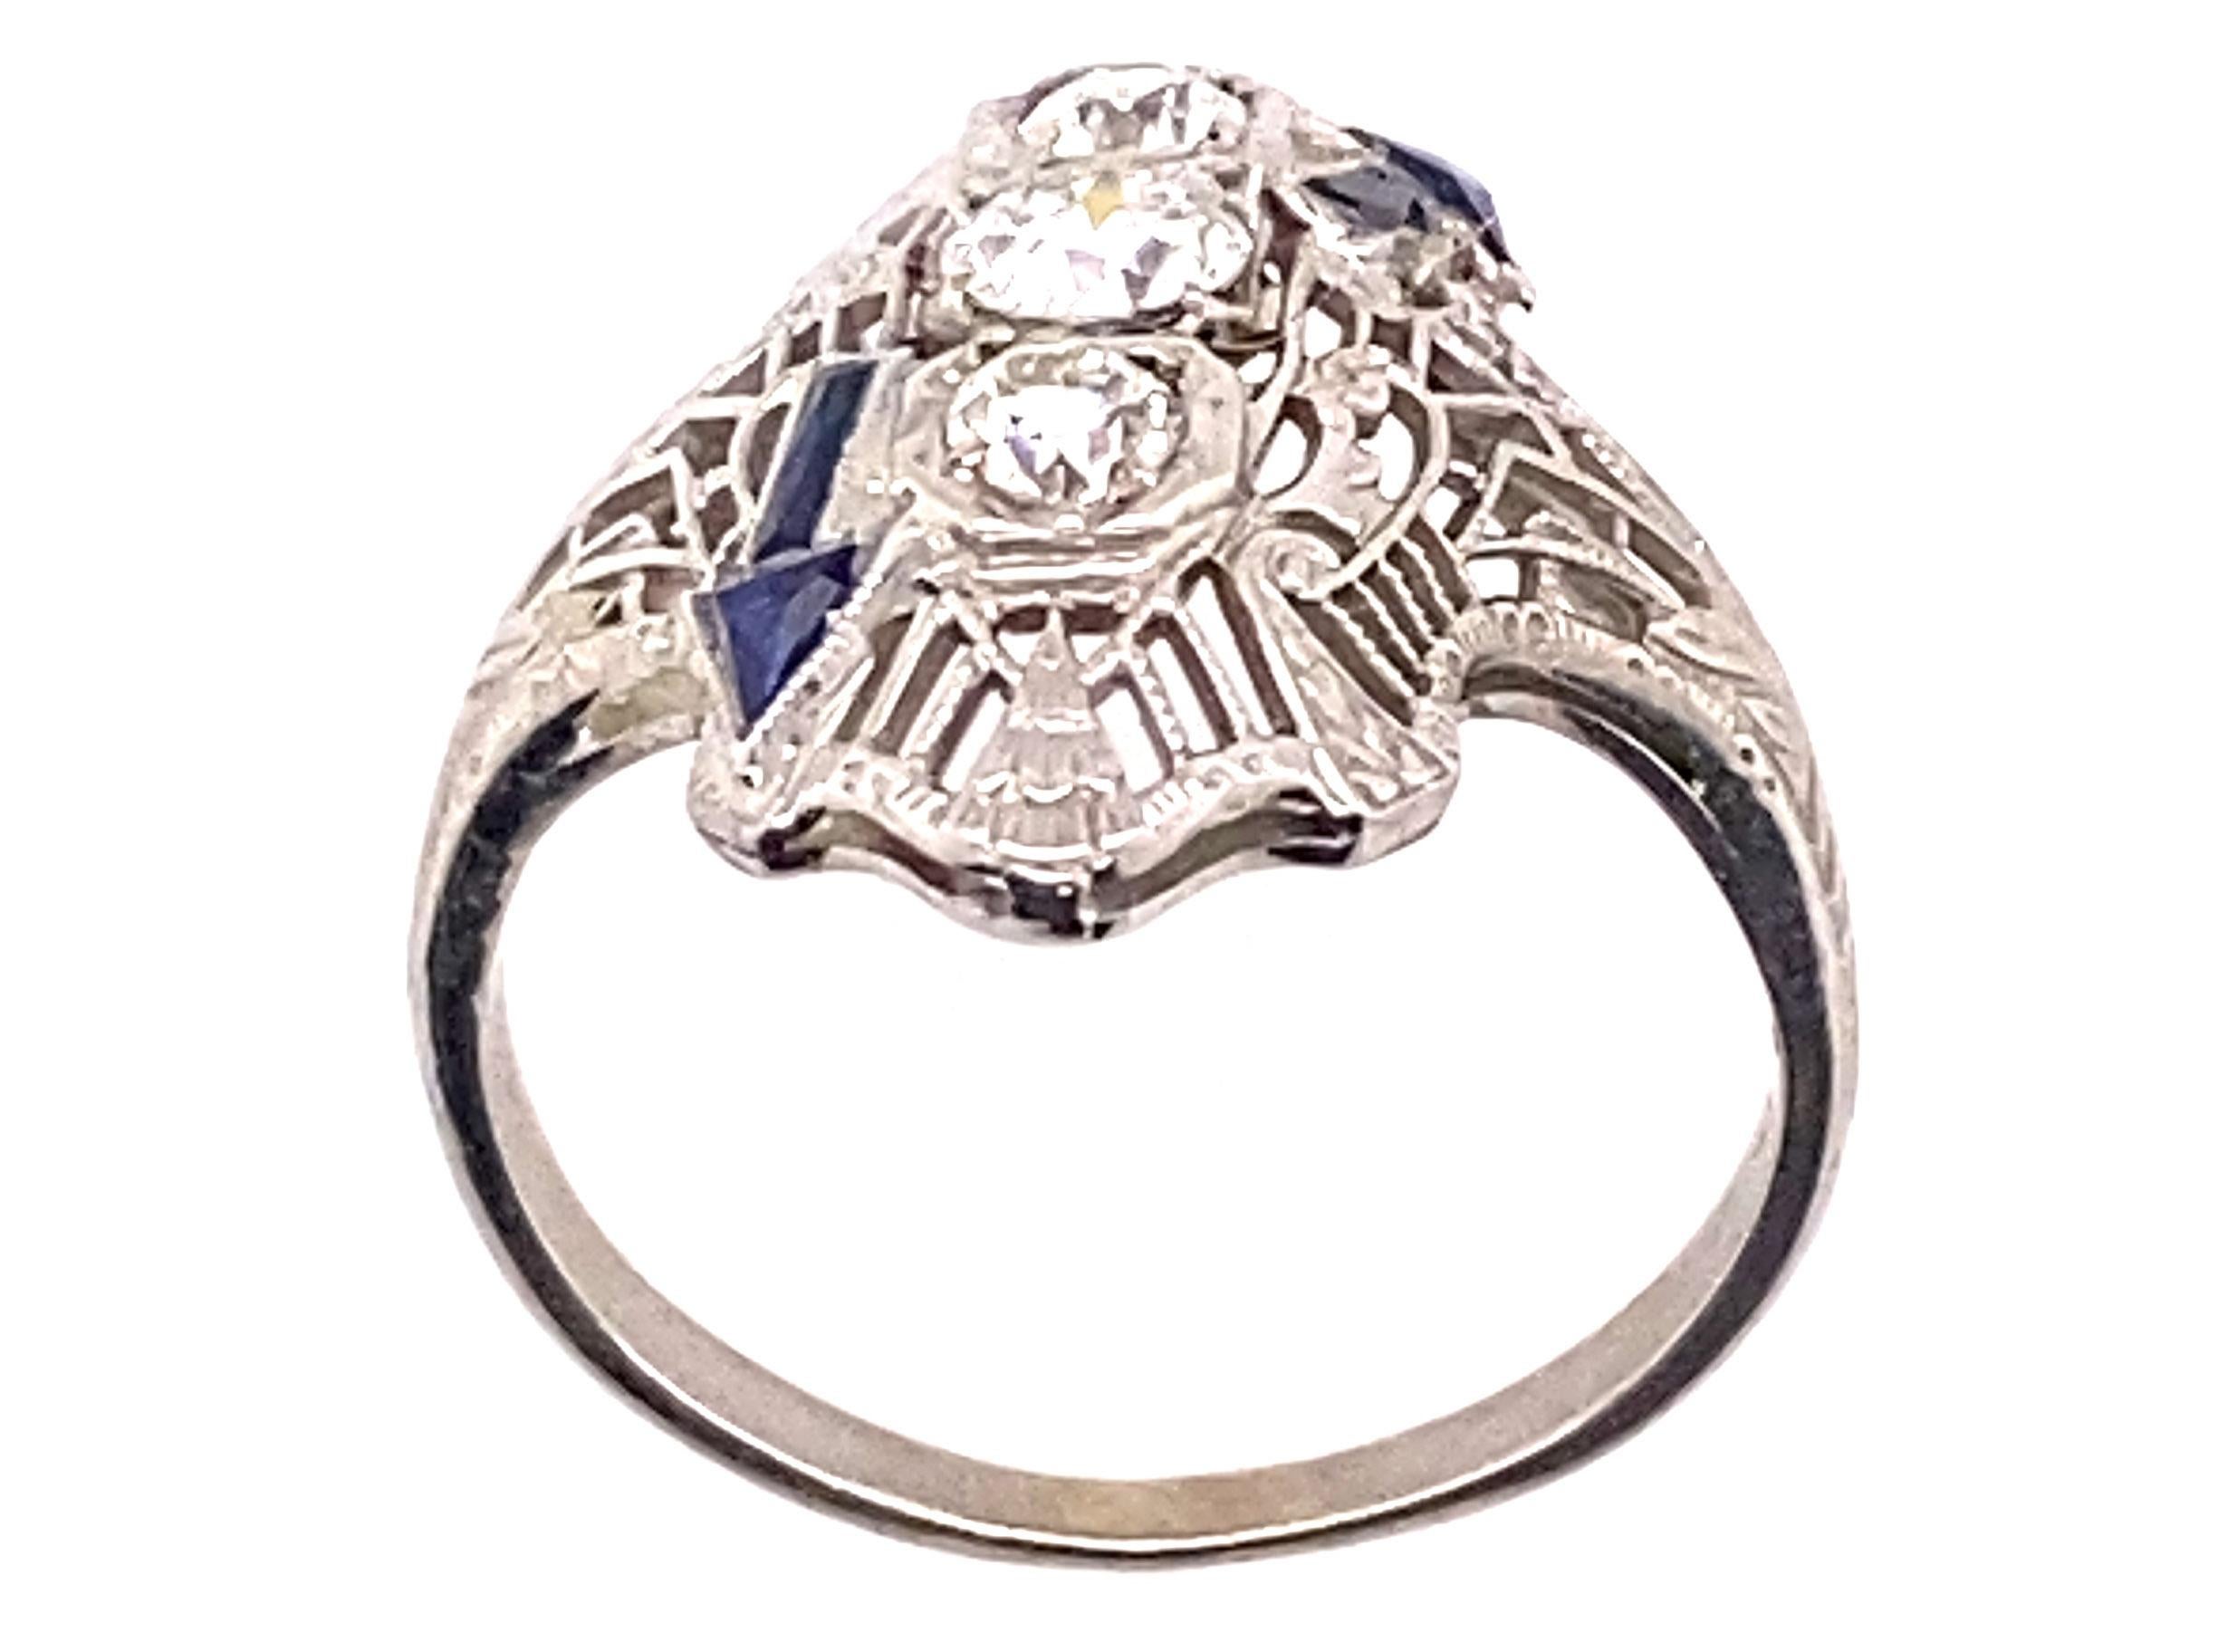 Genuine Original Antique from 1930's 3 Stone .81ct Diamond French Cut Sapphire 18K Art Deco Engagement Cocktail Ring


Featuring 3 SPECTACULAR Natural Mined Old European Cut Center Diamonds 

These Genuine European Diamond are Remarkable 

Hand